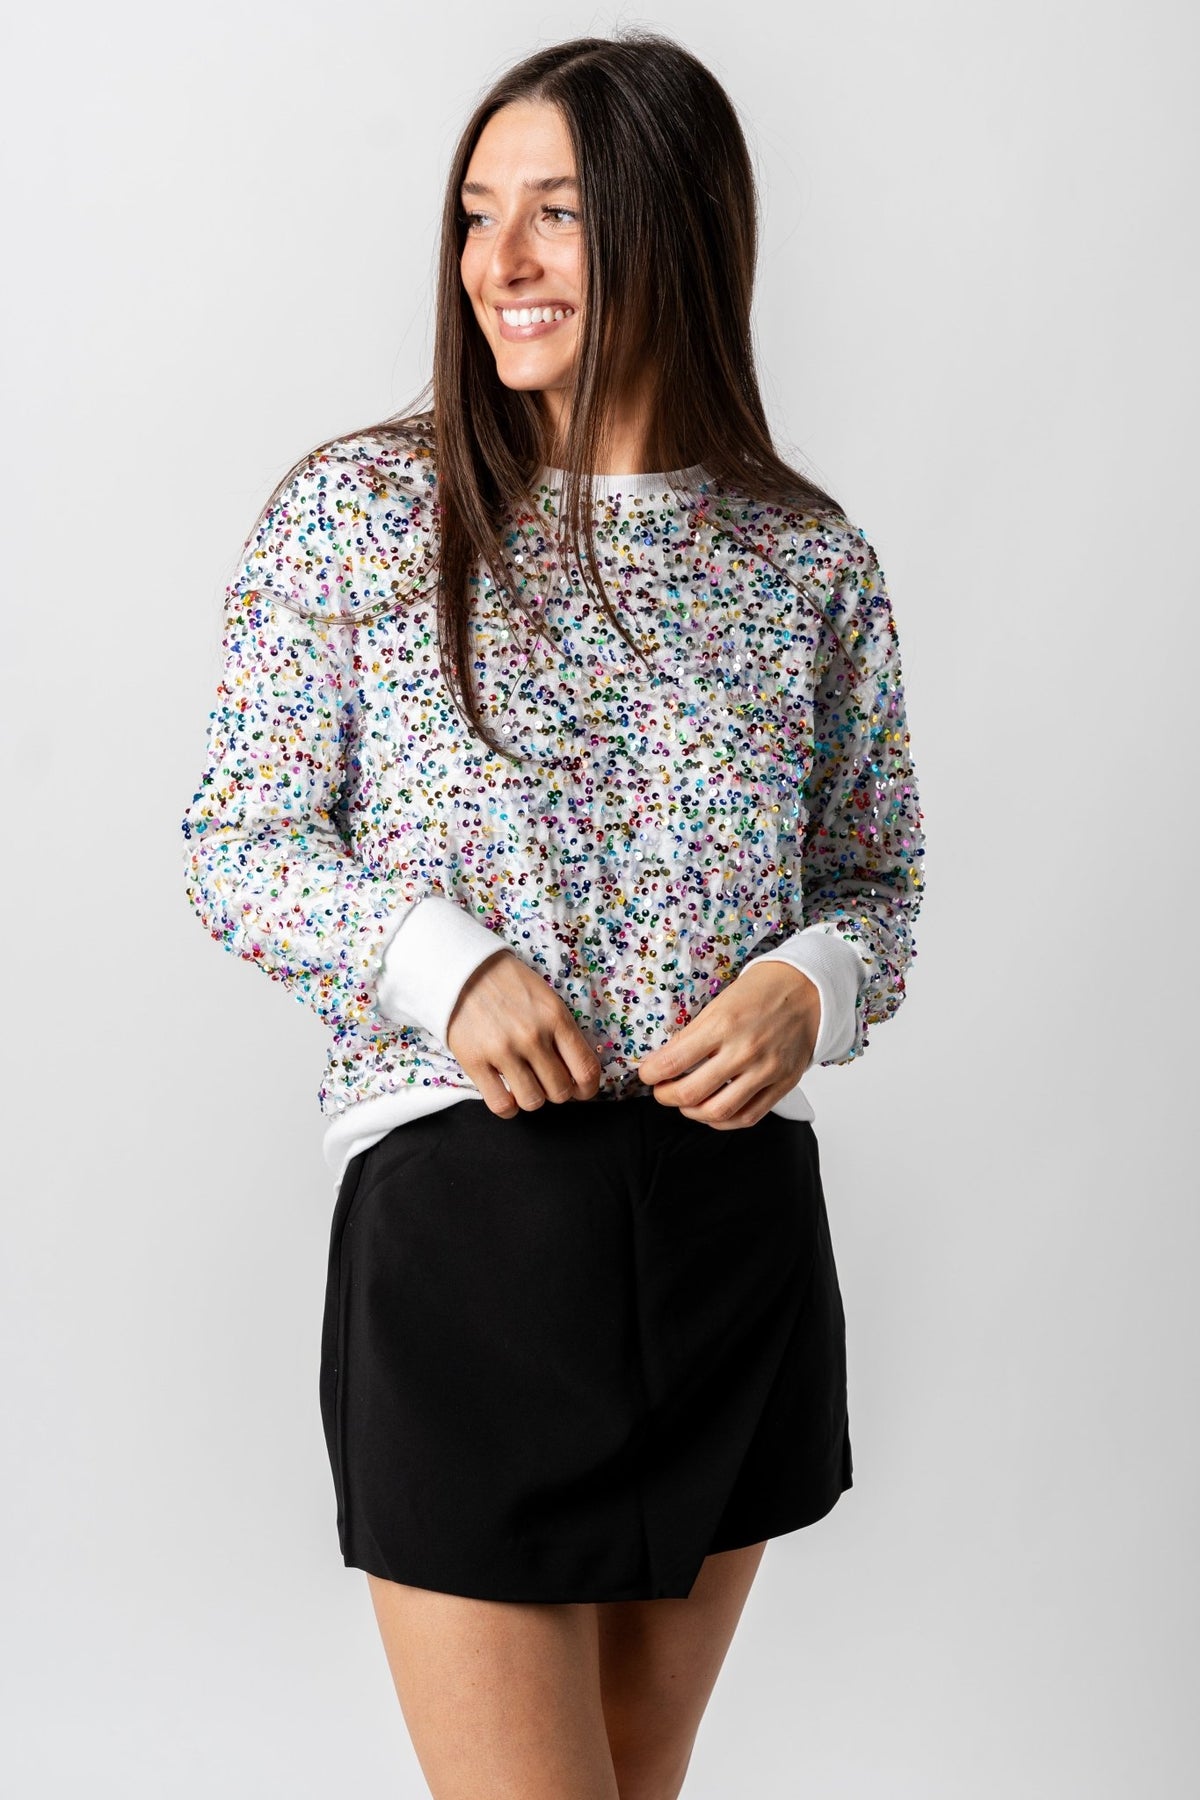 Fiesta sequin sweatshirt white - Trendy Holiday Apparel at Lush Fashion Lounge Boutique in Oklahoma City